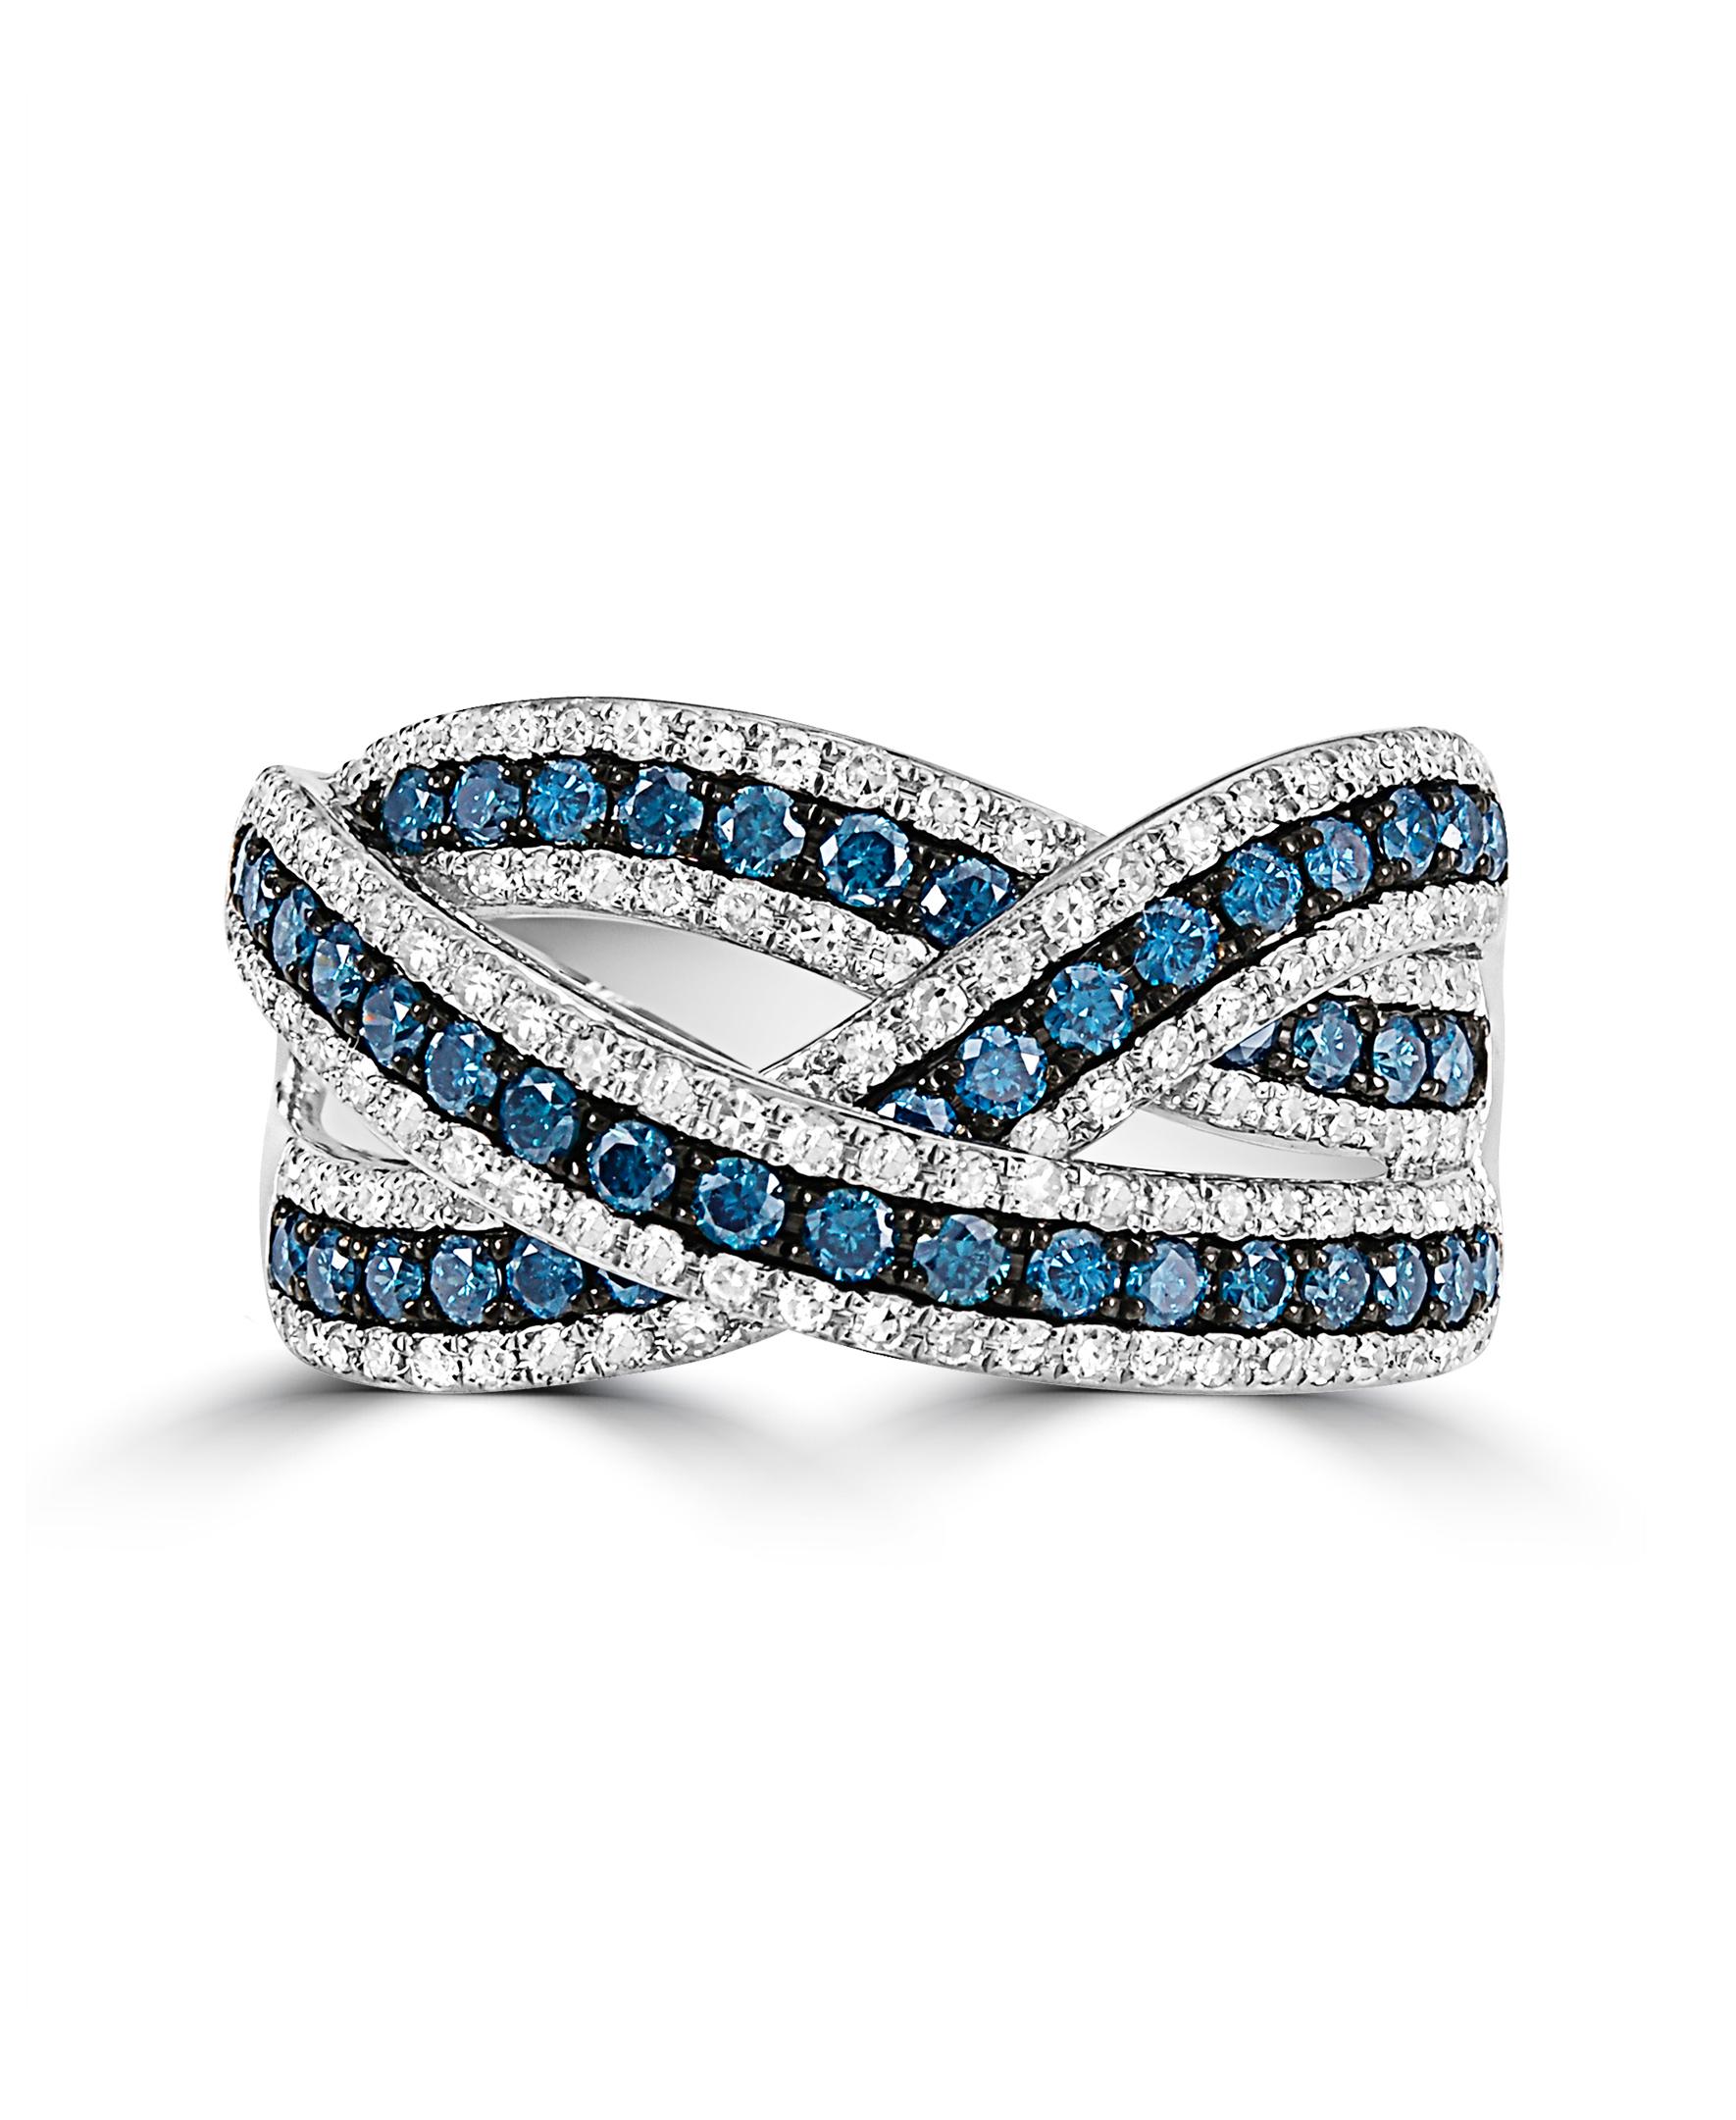 This Effy design ring is set in 14K white gold. 
The diamonds are round in shape, with a combination of white and blue colors,  and the total weight is 1.06 ct.
This ring is a sizable 7. 
The item number is R537.